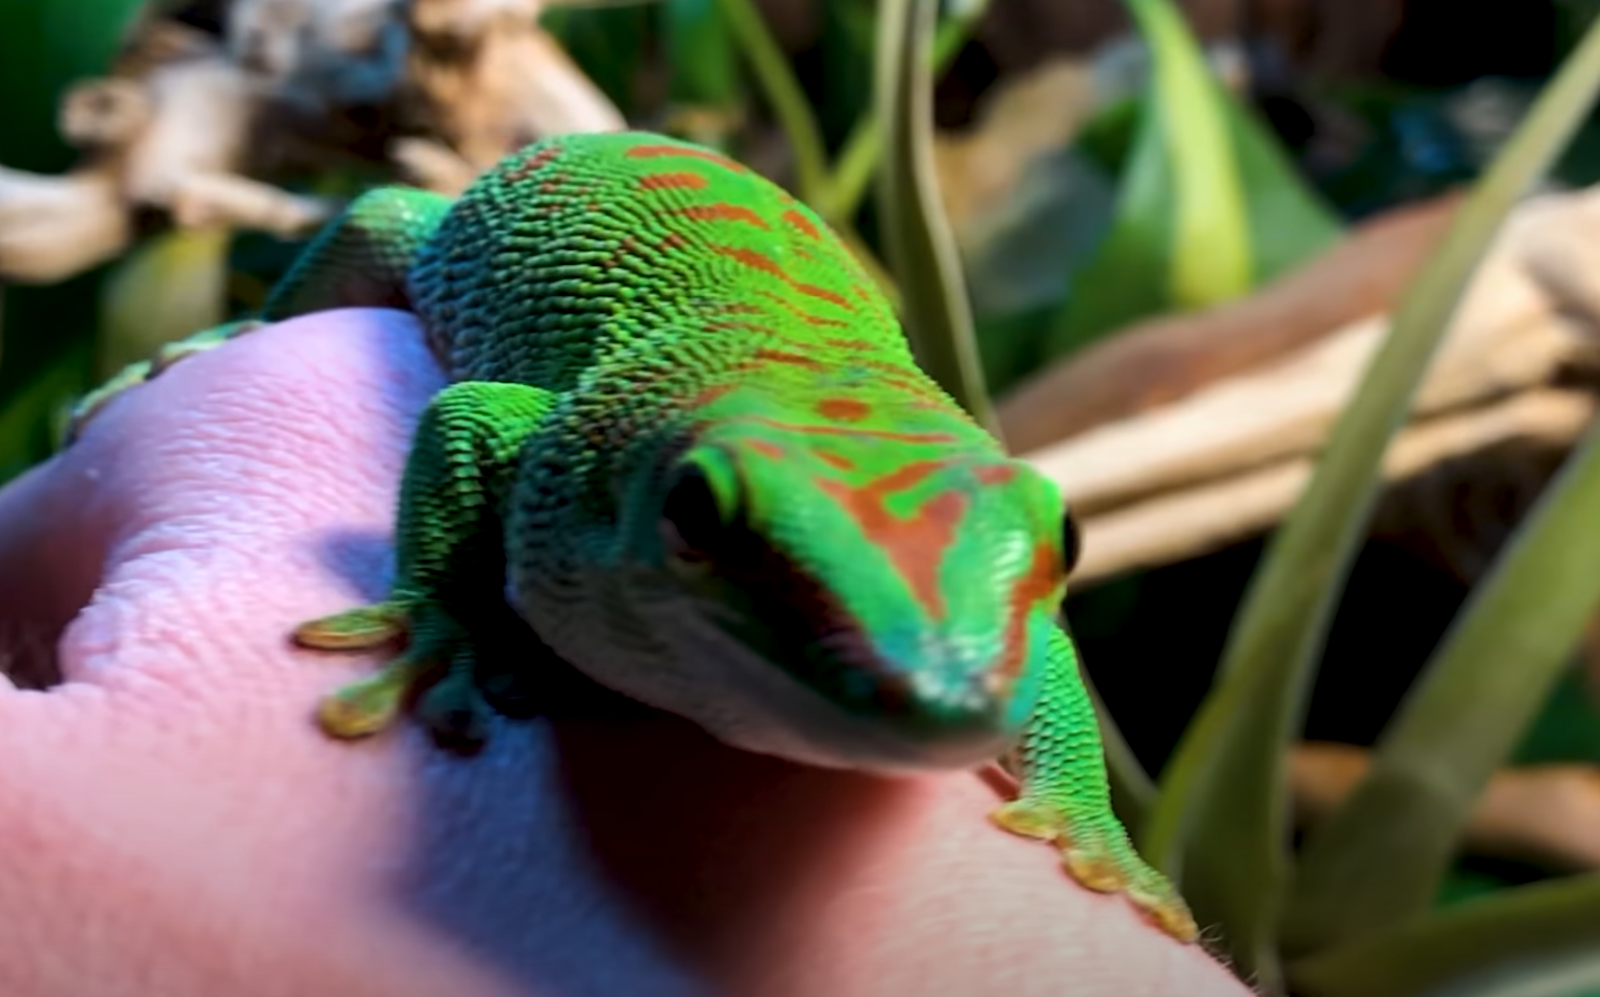 Green giant day gecko on back of hand